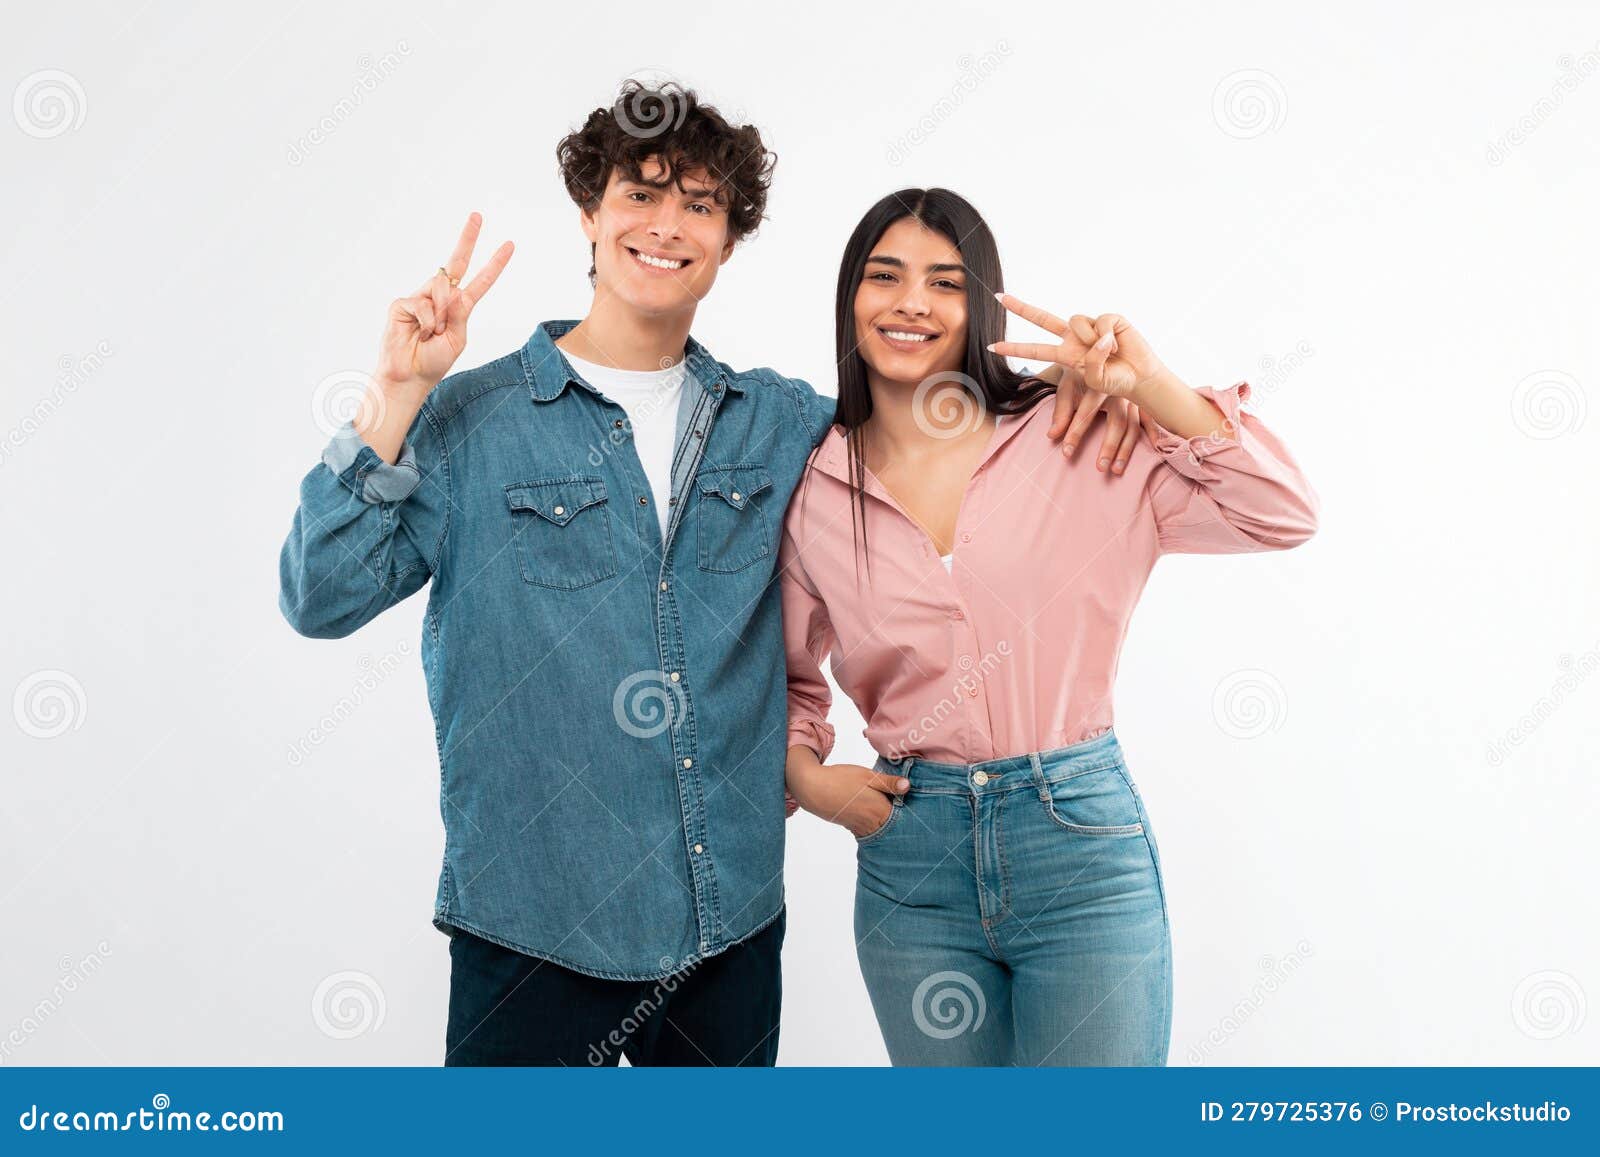 Point Of View Of Young Couple Posing Silly For Selfie Stock Photo -  Download Image Now - iStock